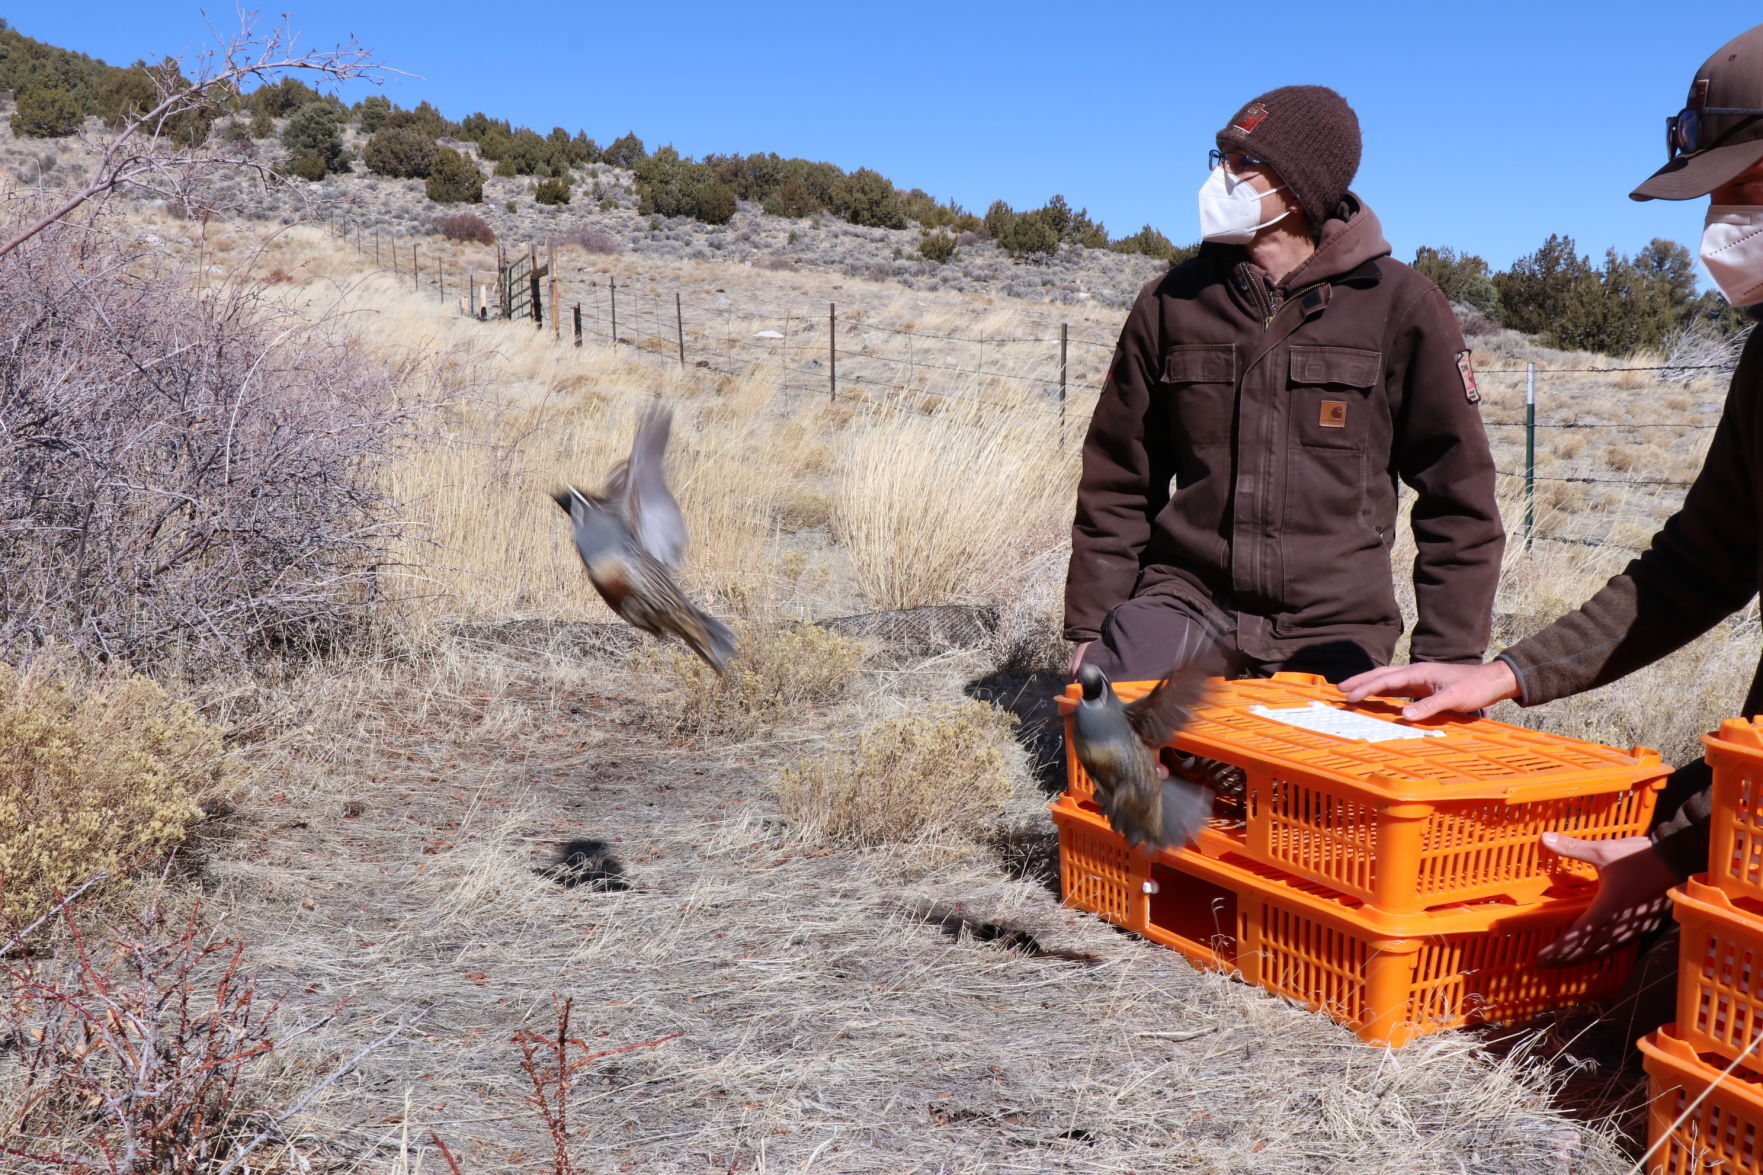 Pilot' project: Remote Box Elder mountains provide new home for